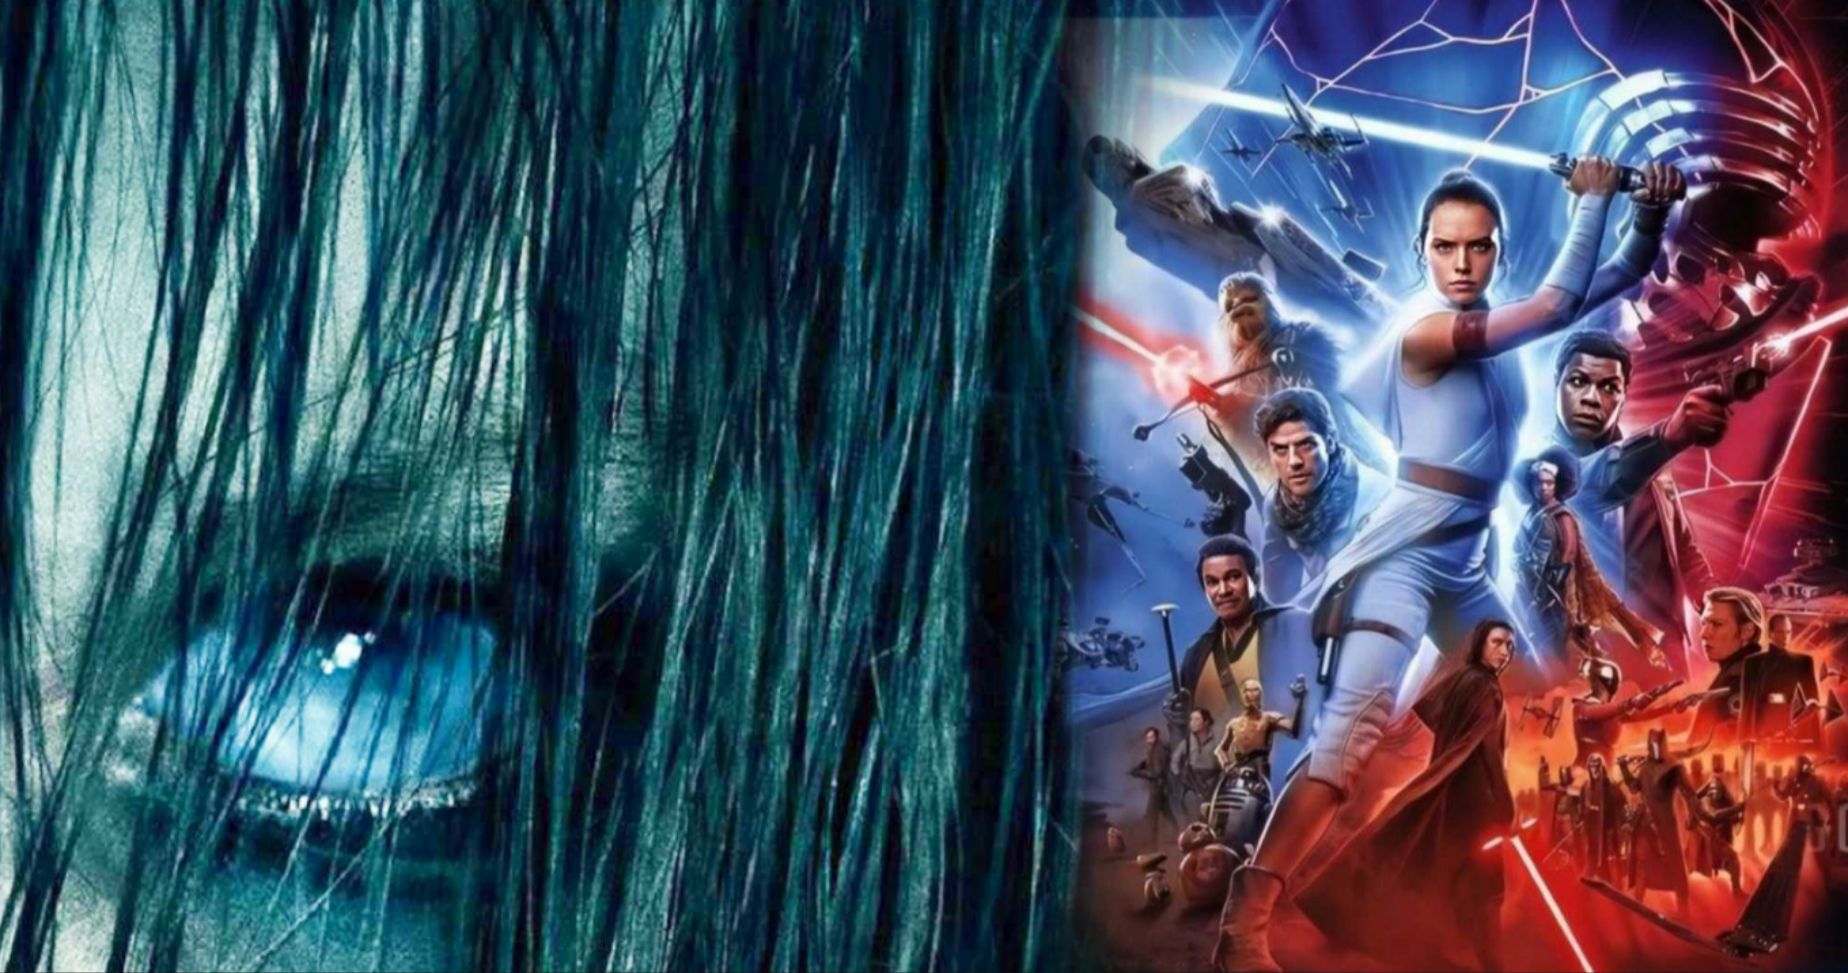 Can The Grudge Scare Star Wars 9 Away from the Box Office This Weekend?